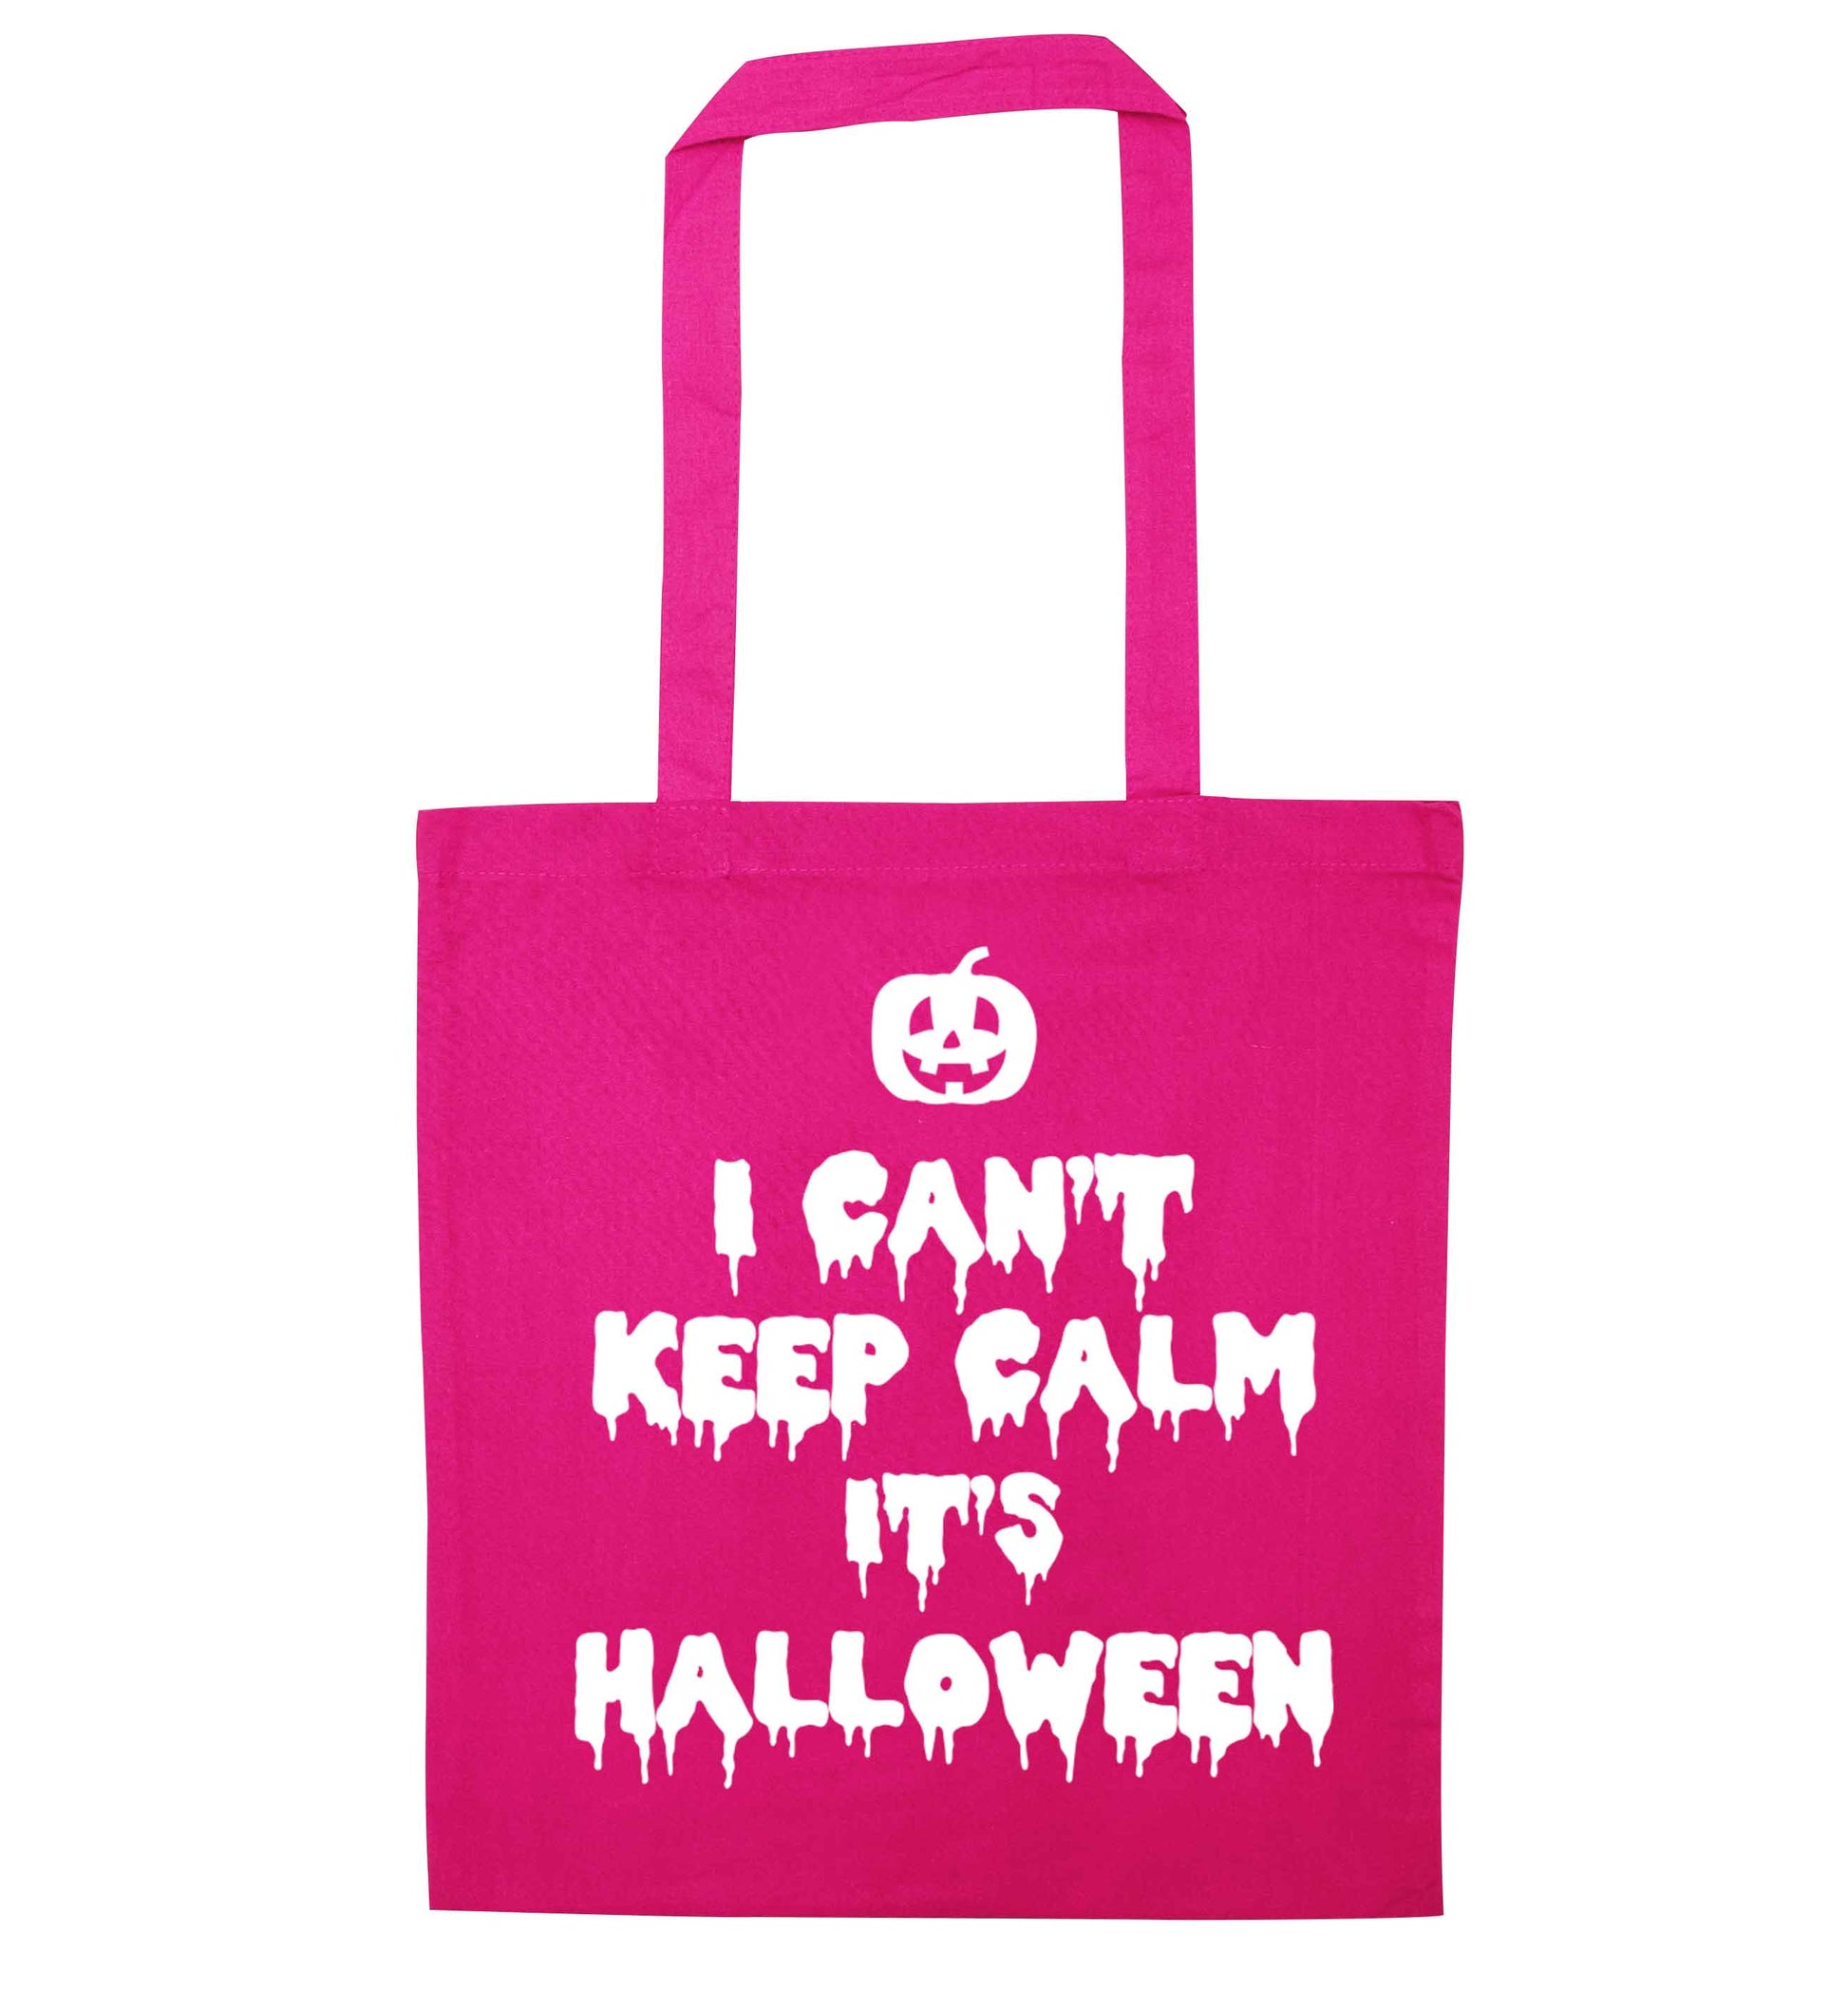 I can't keep calm it's halloween pink tote bag